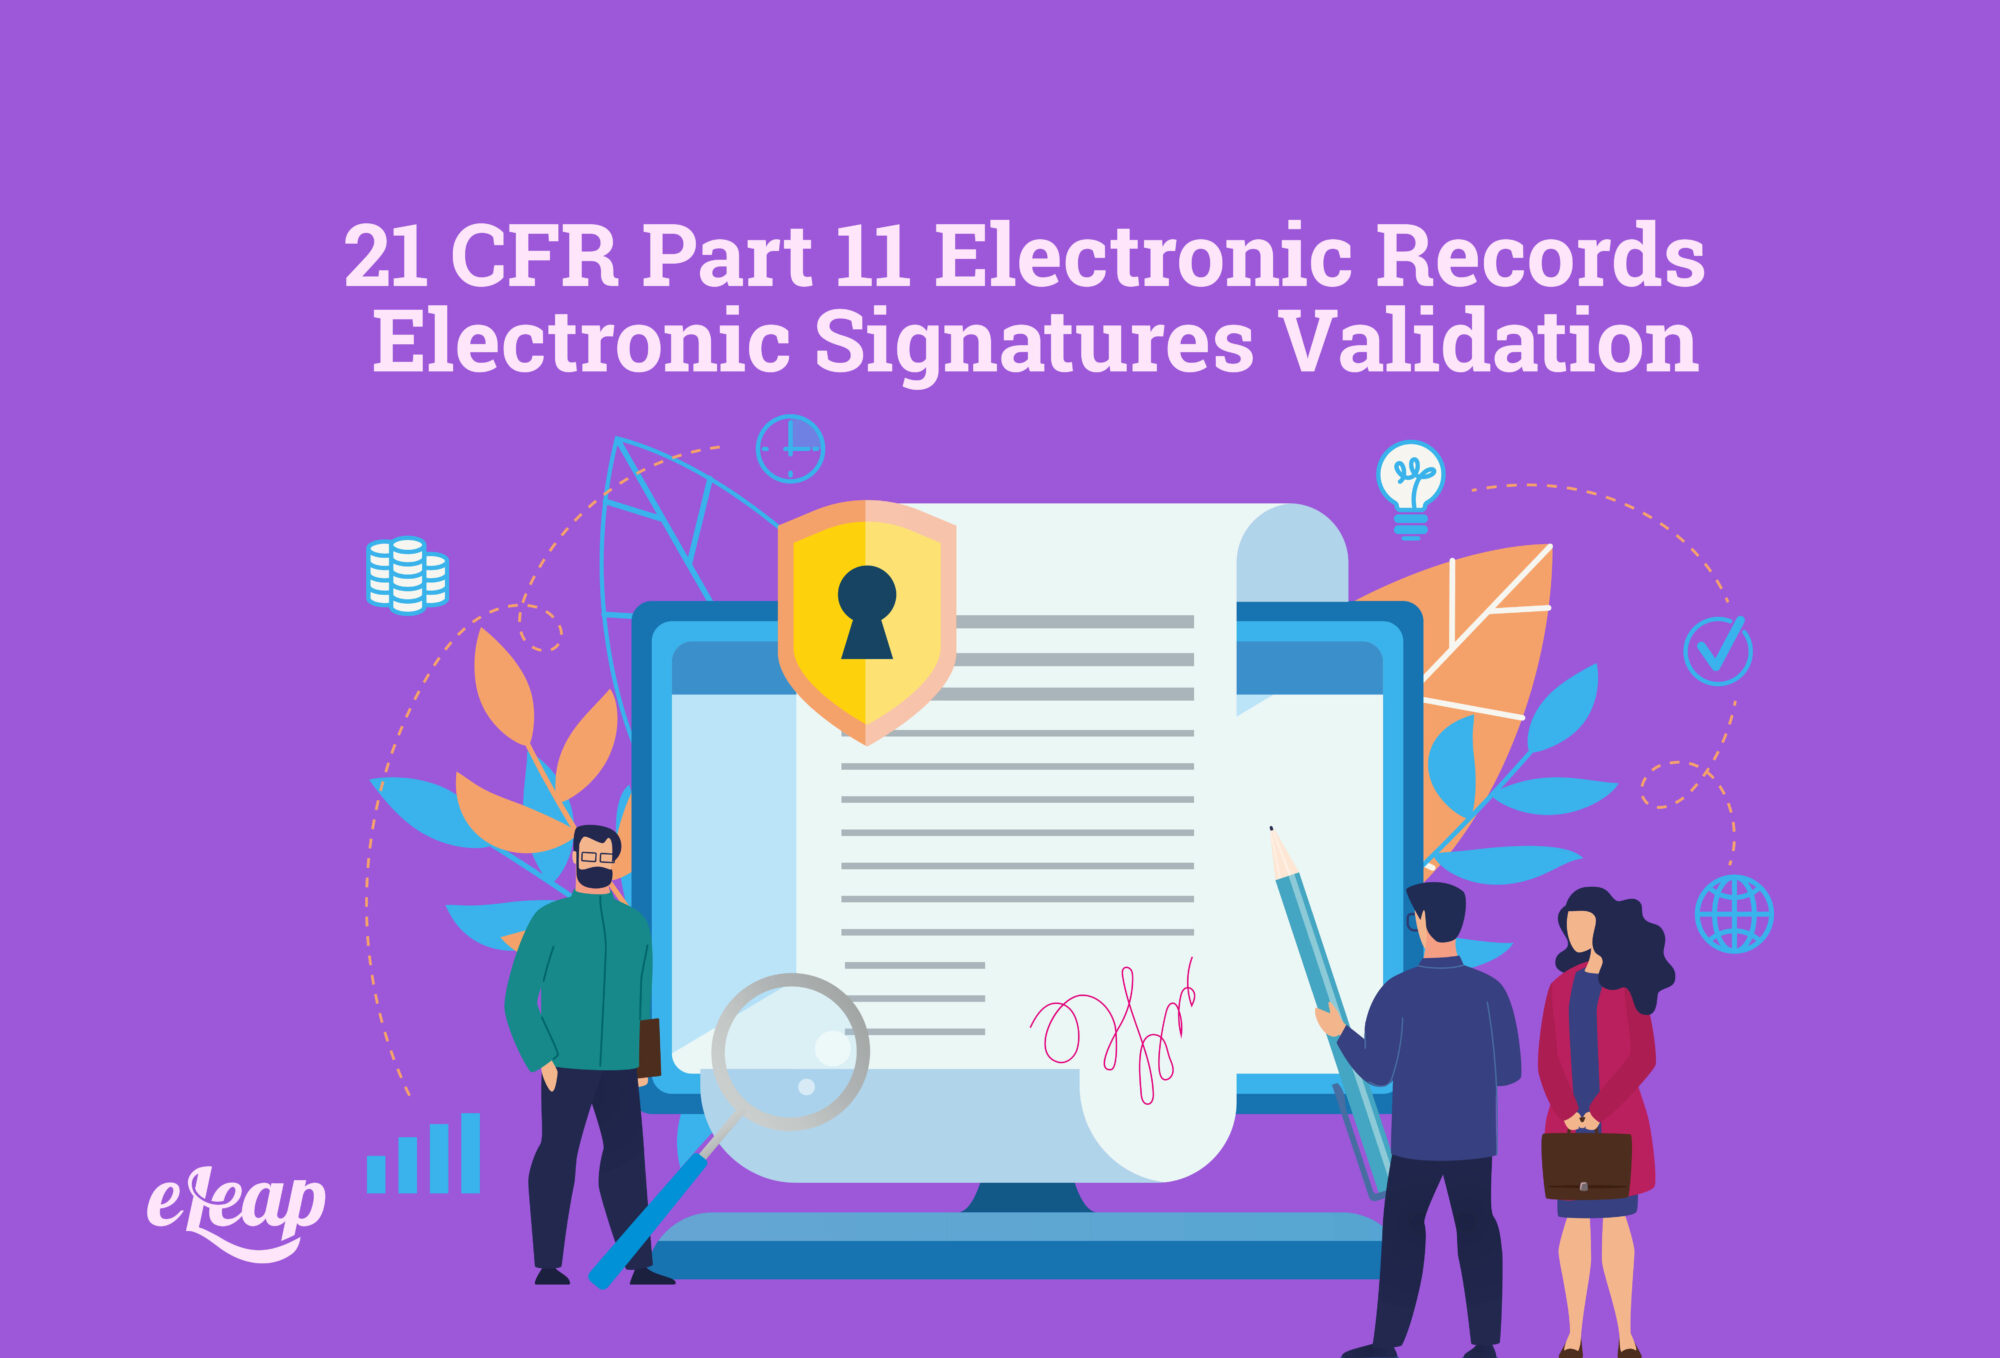 21 CFR Part 11 Electronic Records Electronic Signatures Validation